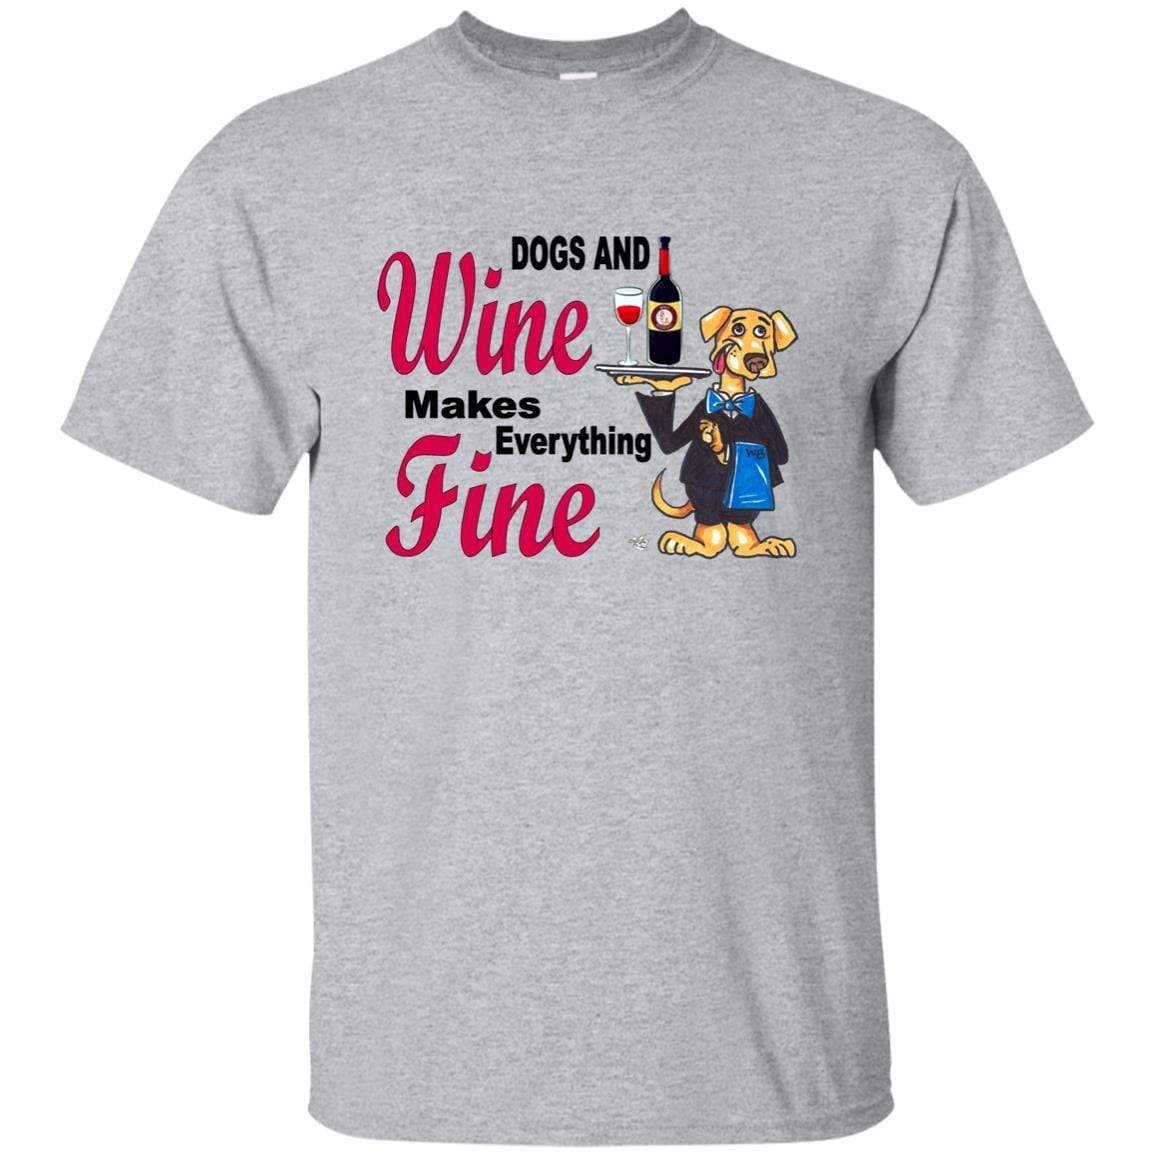 T-Shirts Sport Grey / S WineyBitches.co ""Dogs and Wine Makes Everything Fine" Ultra Cotton Unisex T-Shirt WineyBitchesCo